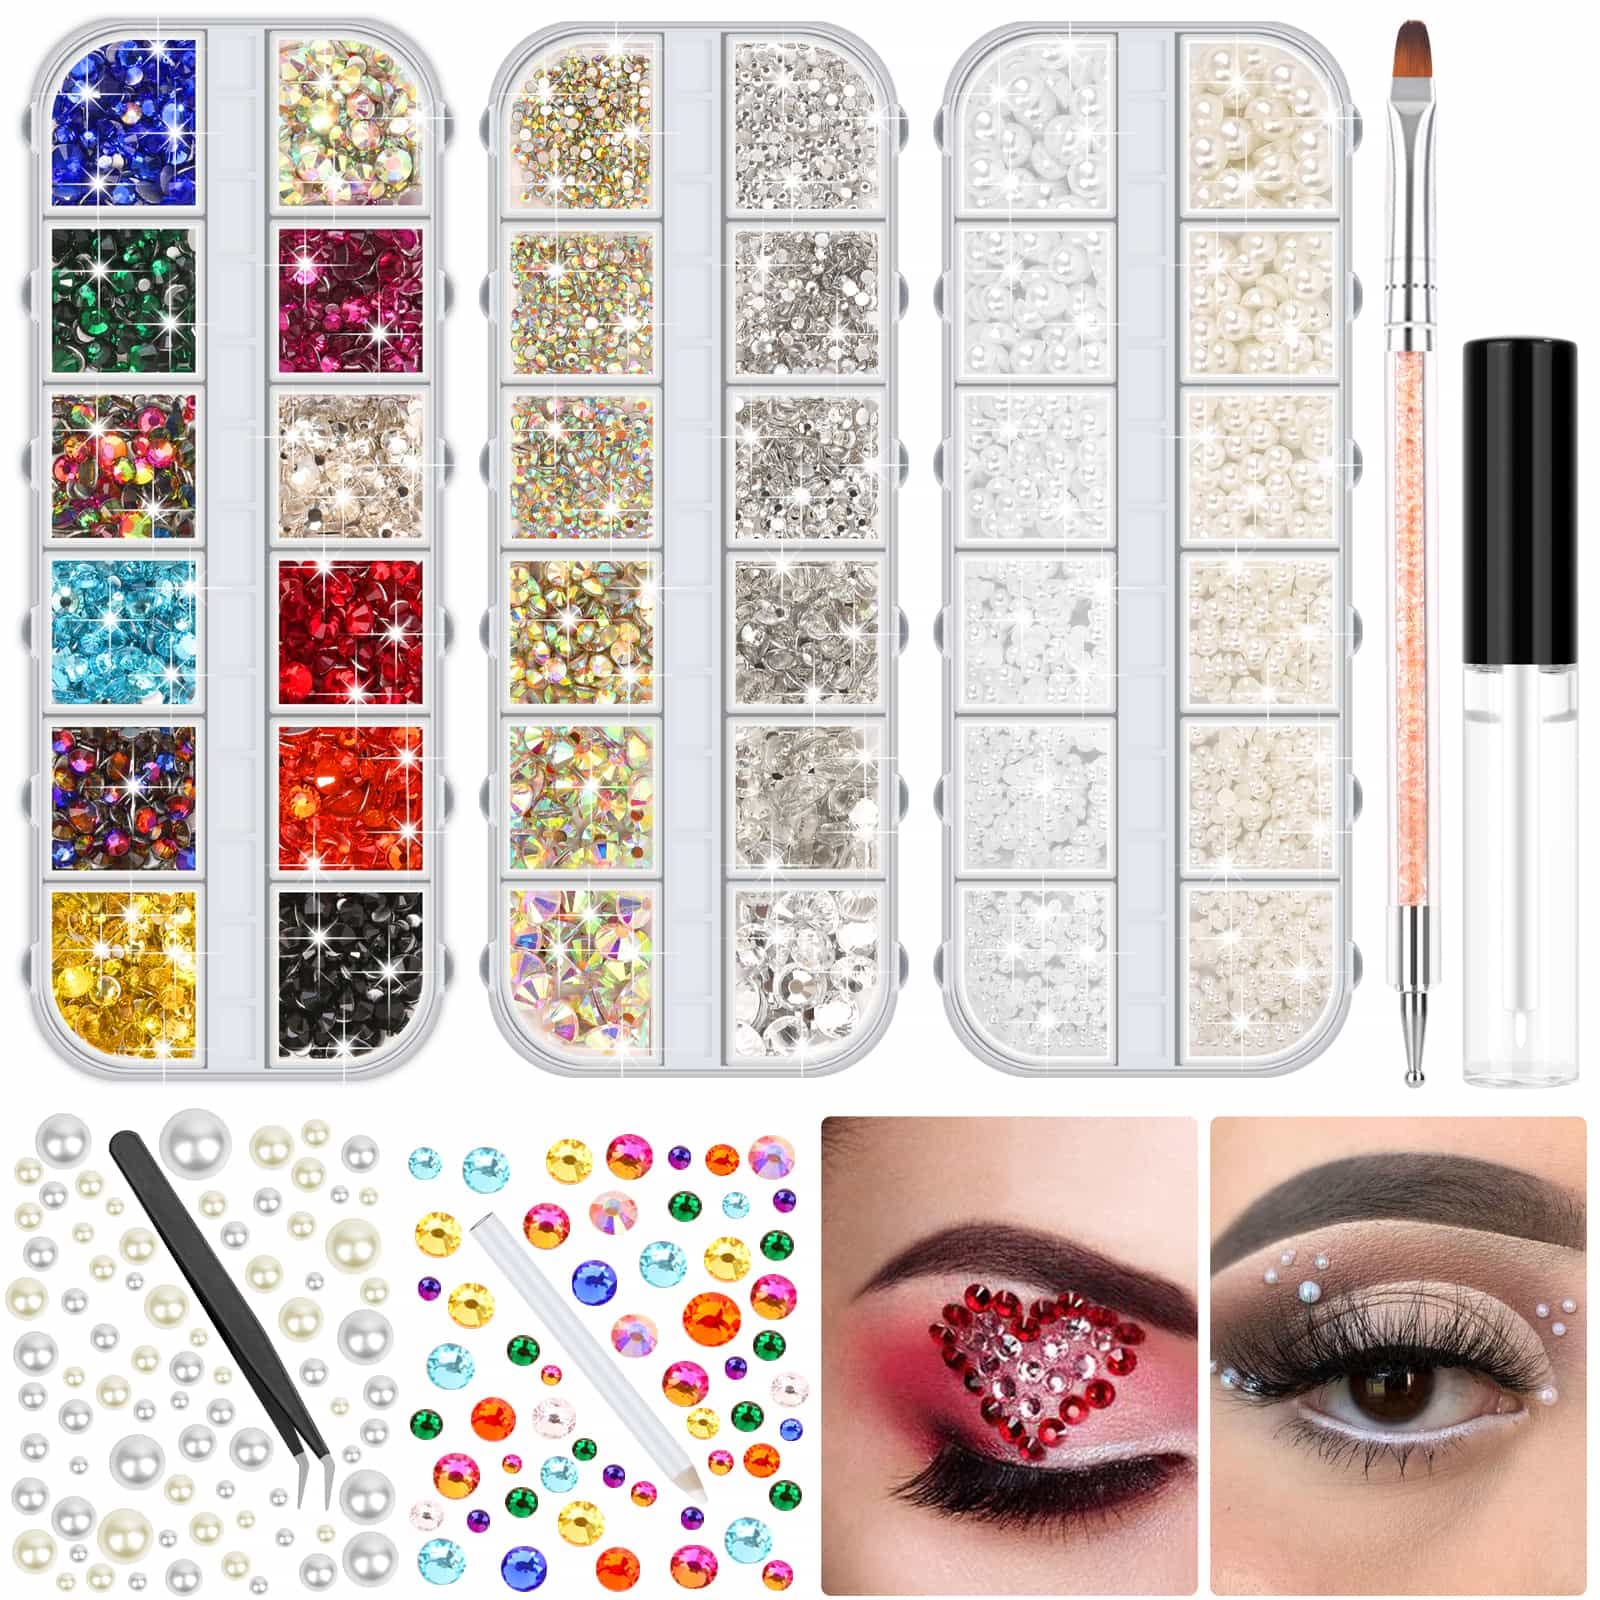 Hair Face Gems Rhinestone Kit with Makeup Glue, Colorful Jewels AB&Clear  Rhinestone Set, Wax Pencil Tweezer and Brush for Face Eye Hair Body Makeup